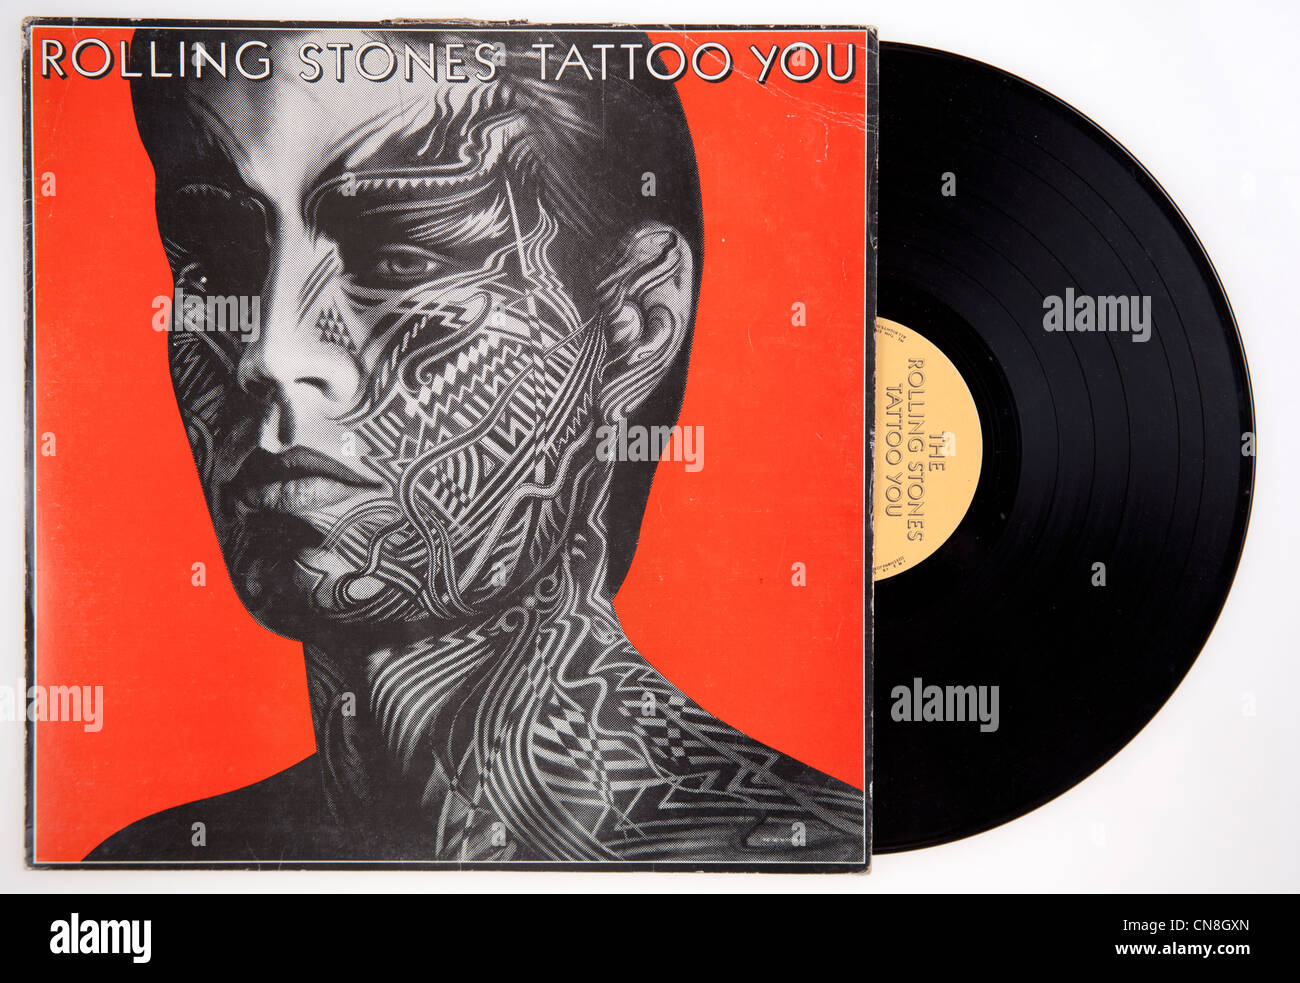 Cover of vinyl album Tattoo You by Rolling Stones, released 1981 on Virgin Records Stock Photo